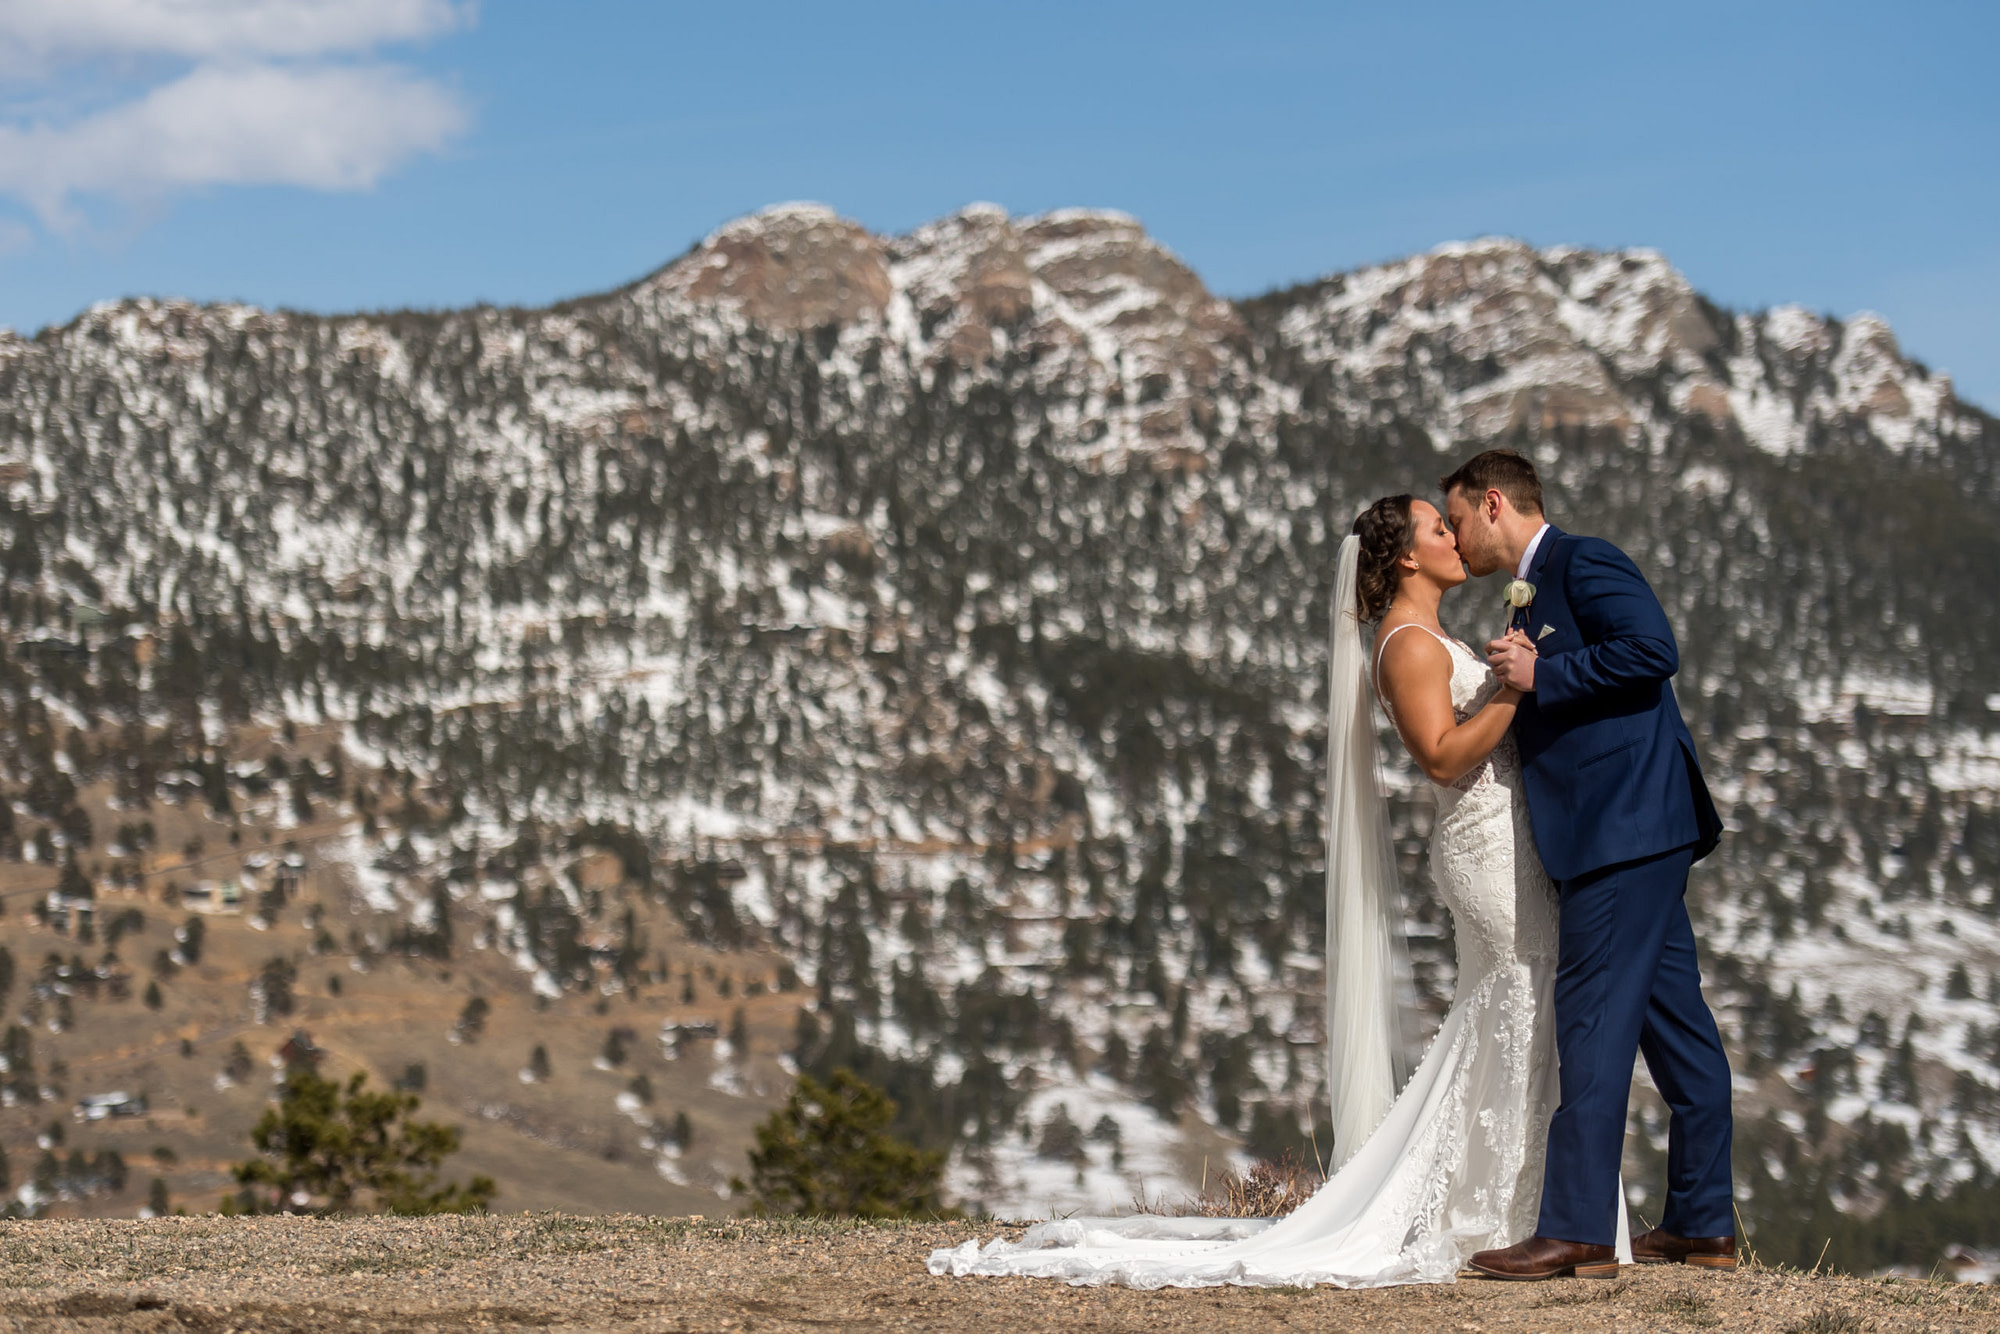 The bride and groom kiss during their YMCA of the Rockies wedding in Estes Park, Colorado.